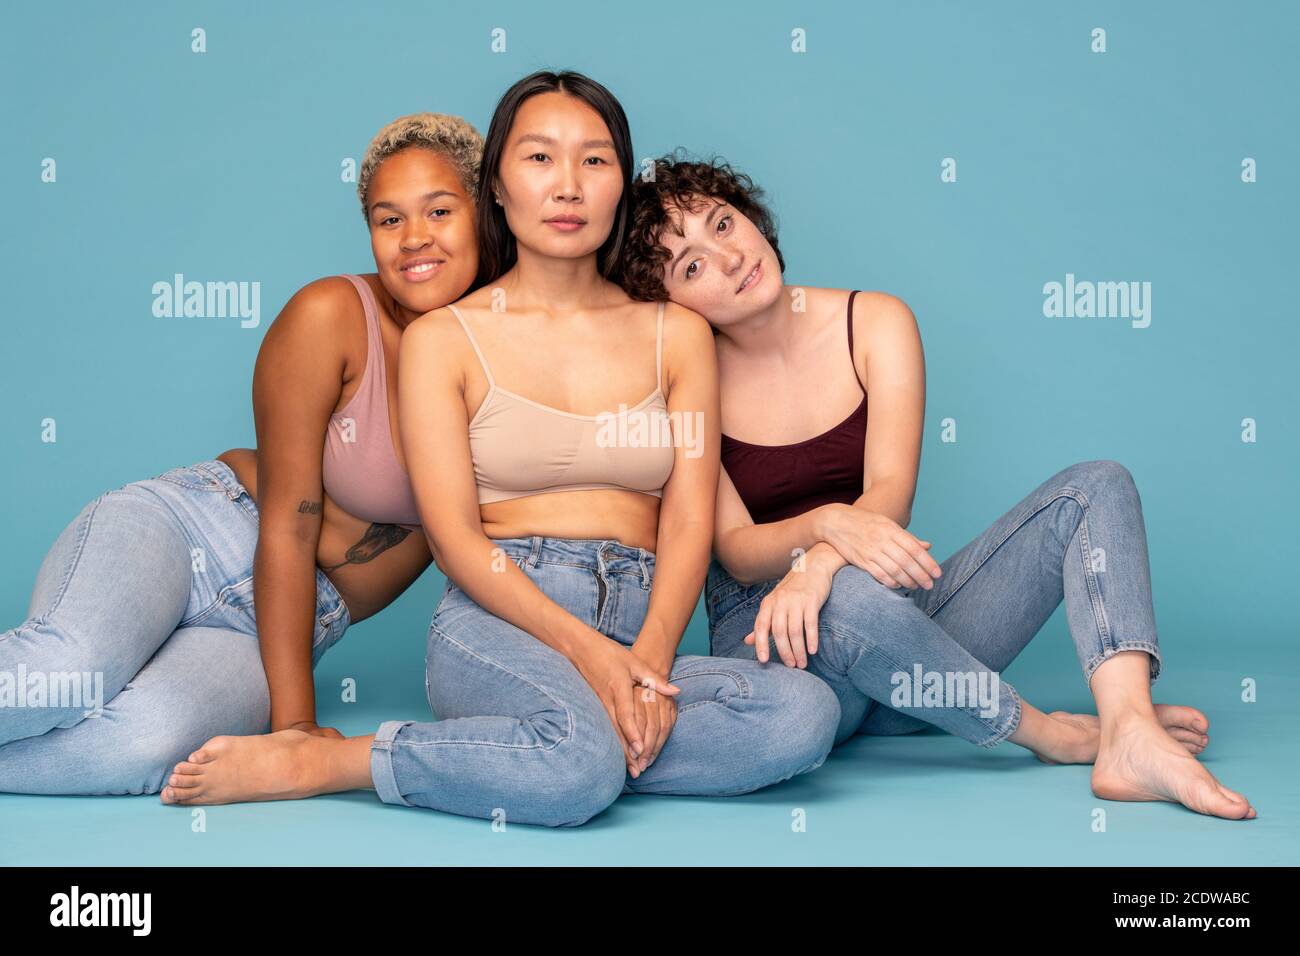 Three young affectionate and friendly women in tanktops and blue jeans Stock Photo